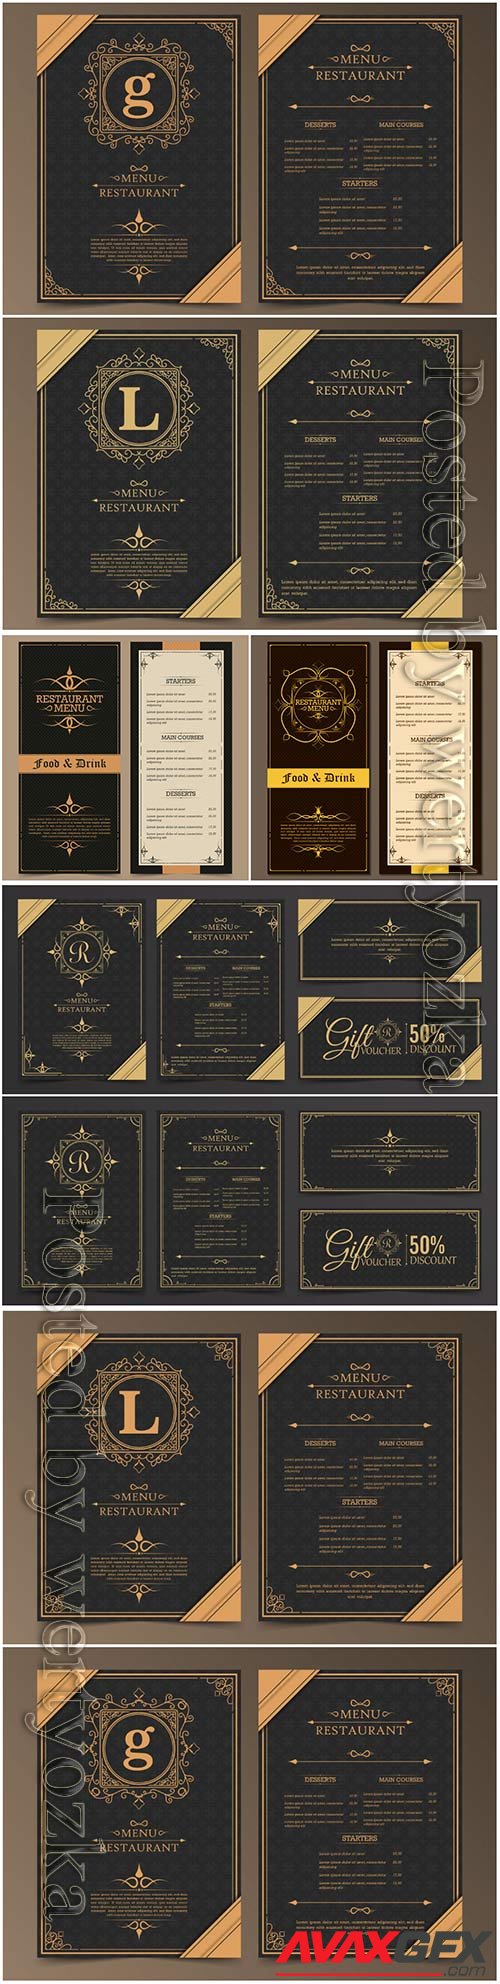 Menu layout with ornamental elements